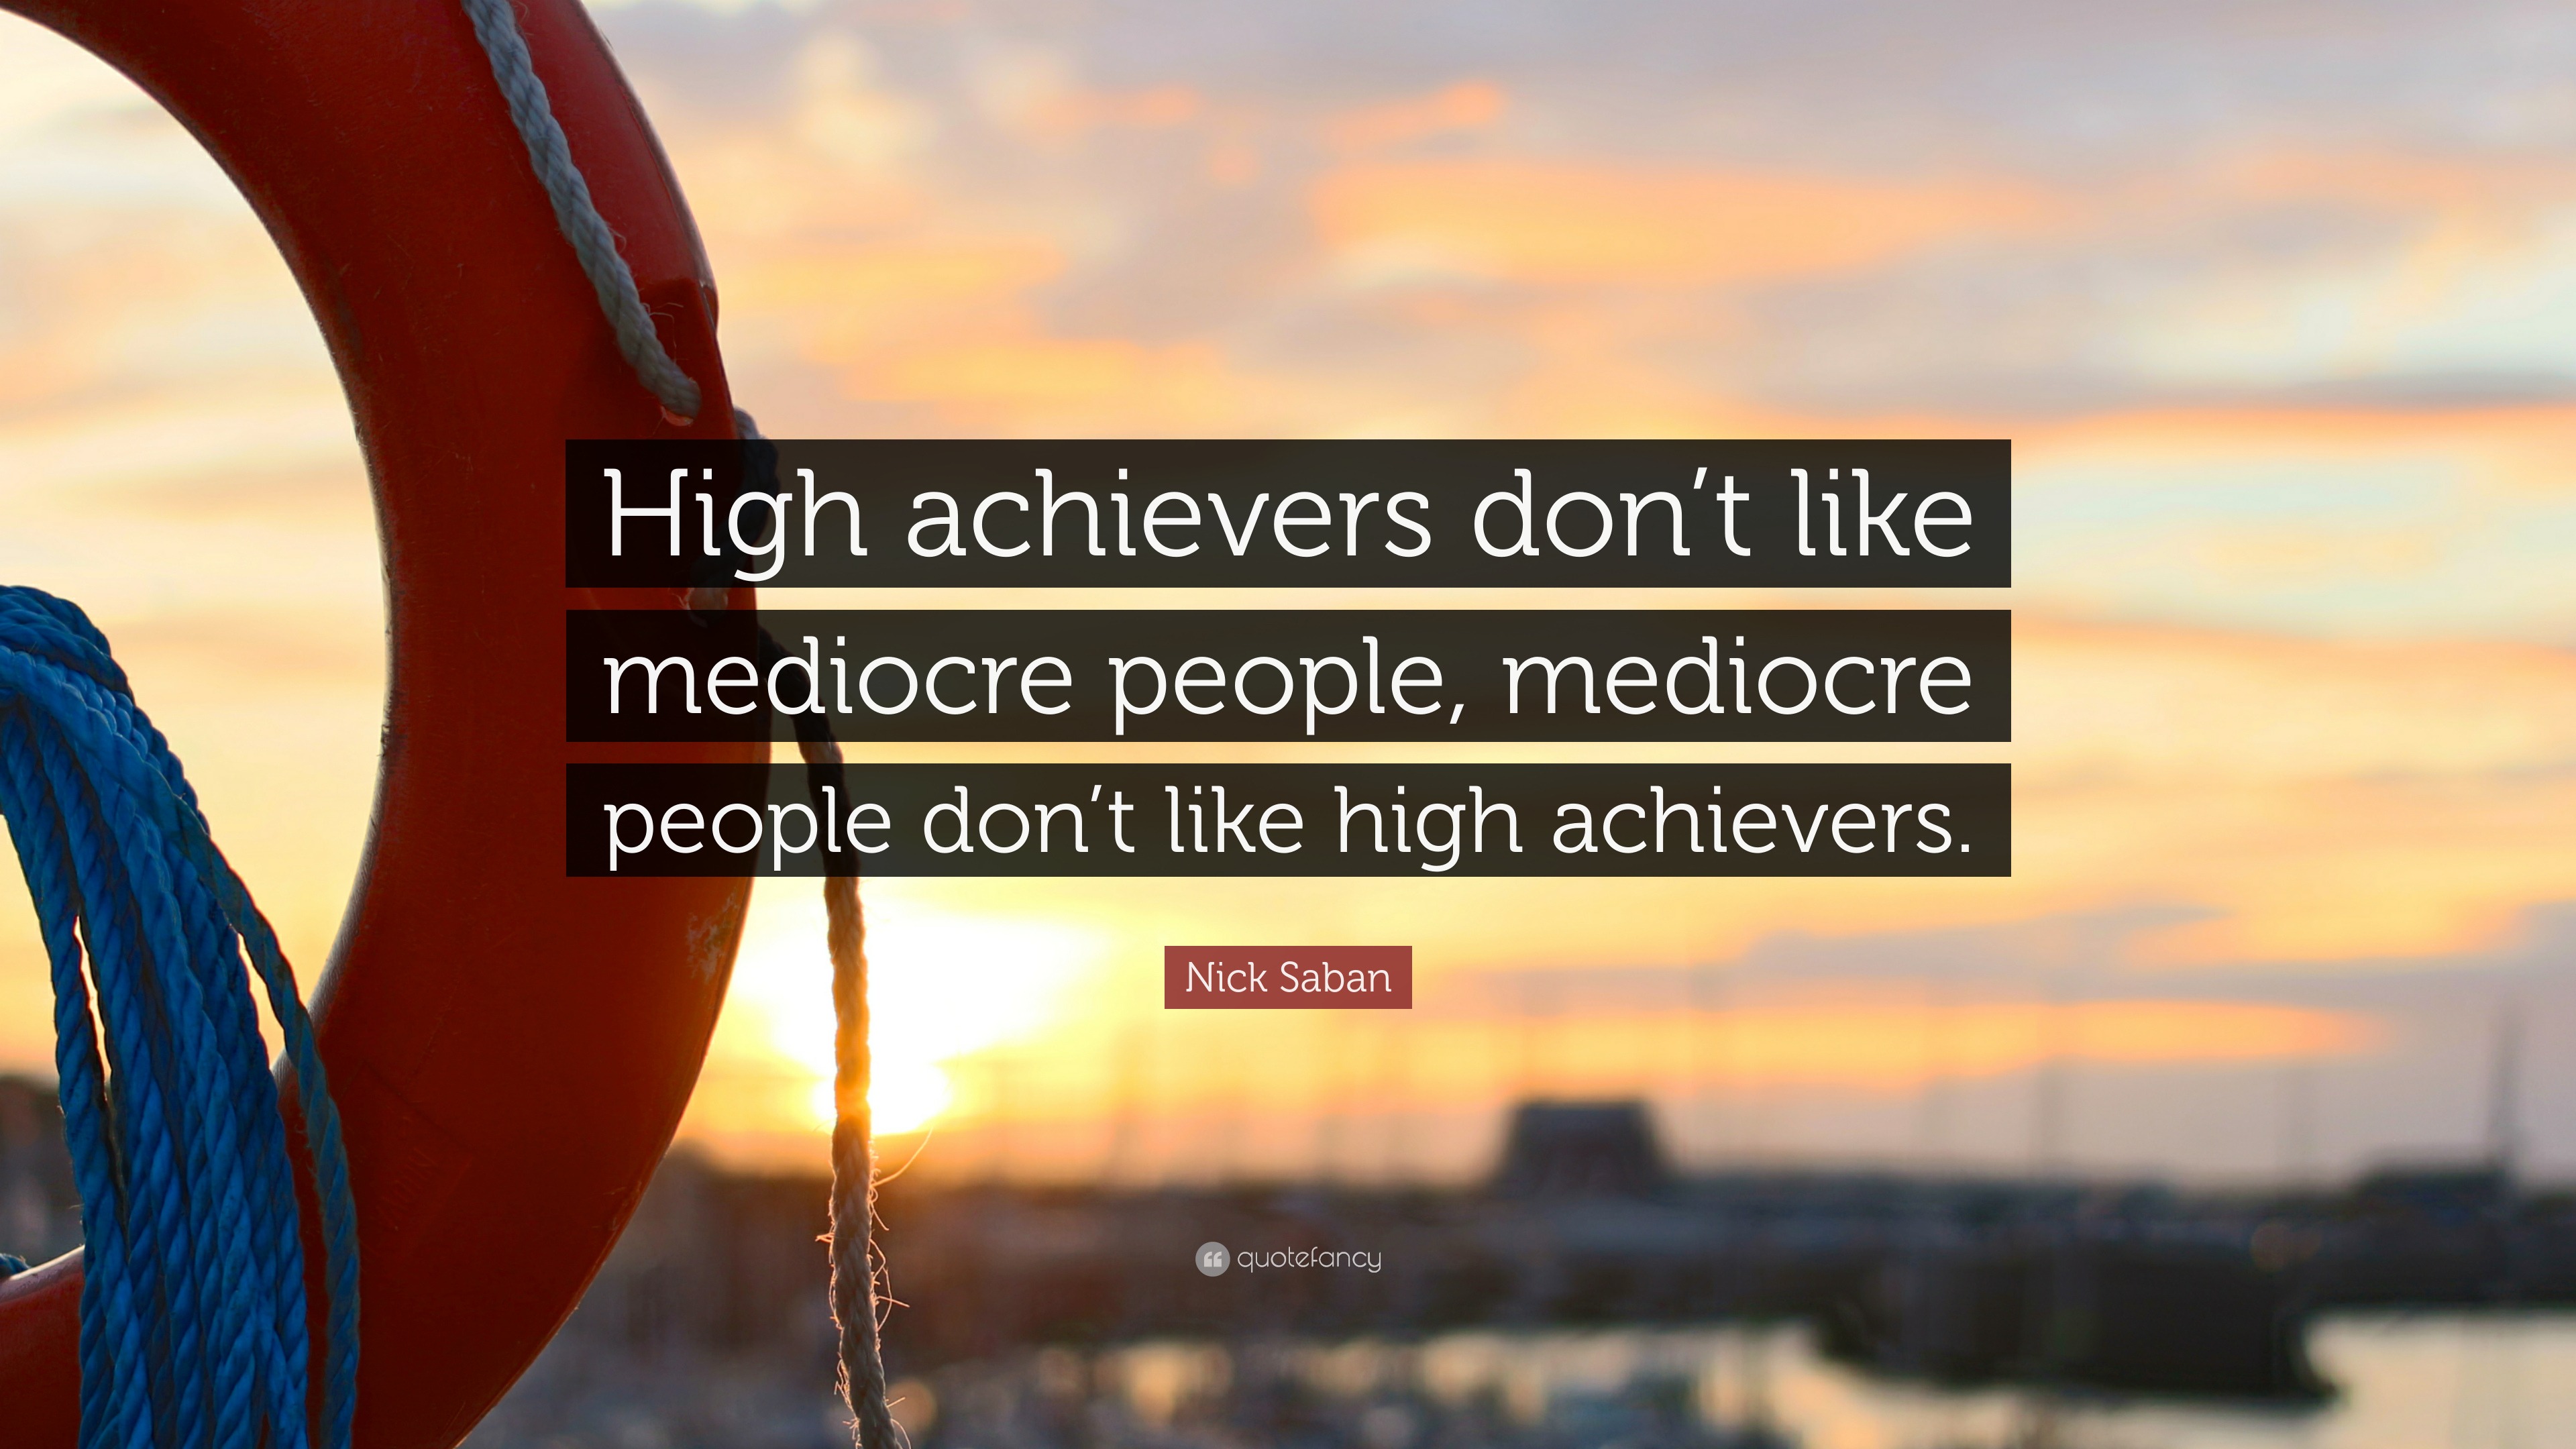 Nick Saban Quote: “High achievers don’t like mediocre people, mediocre